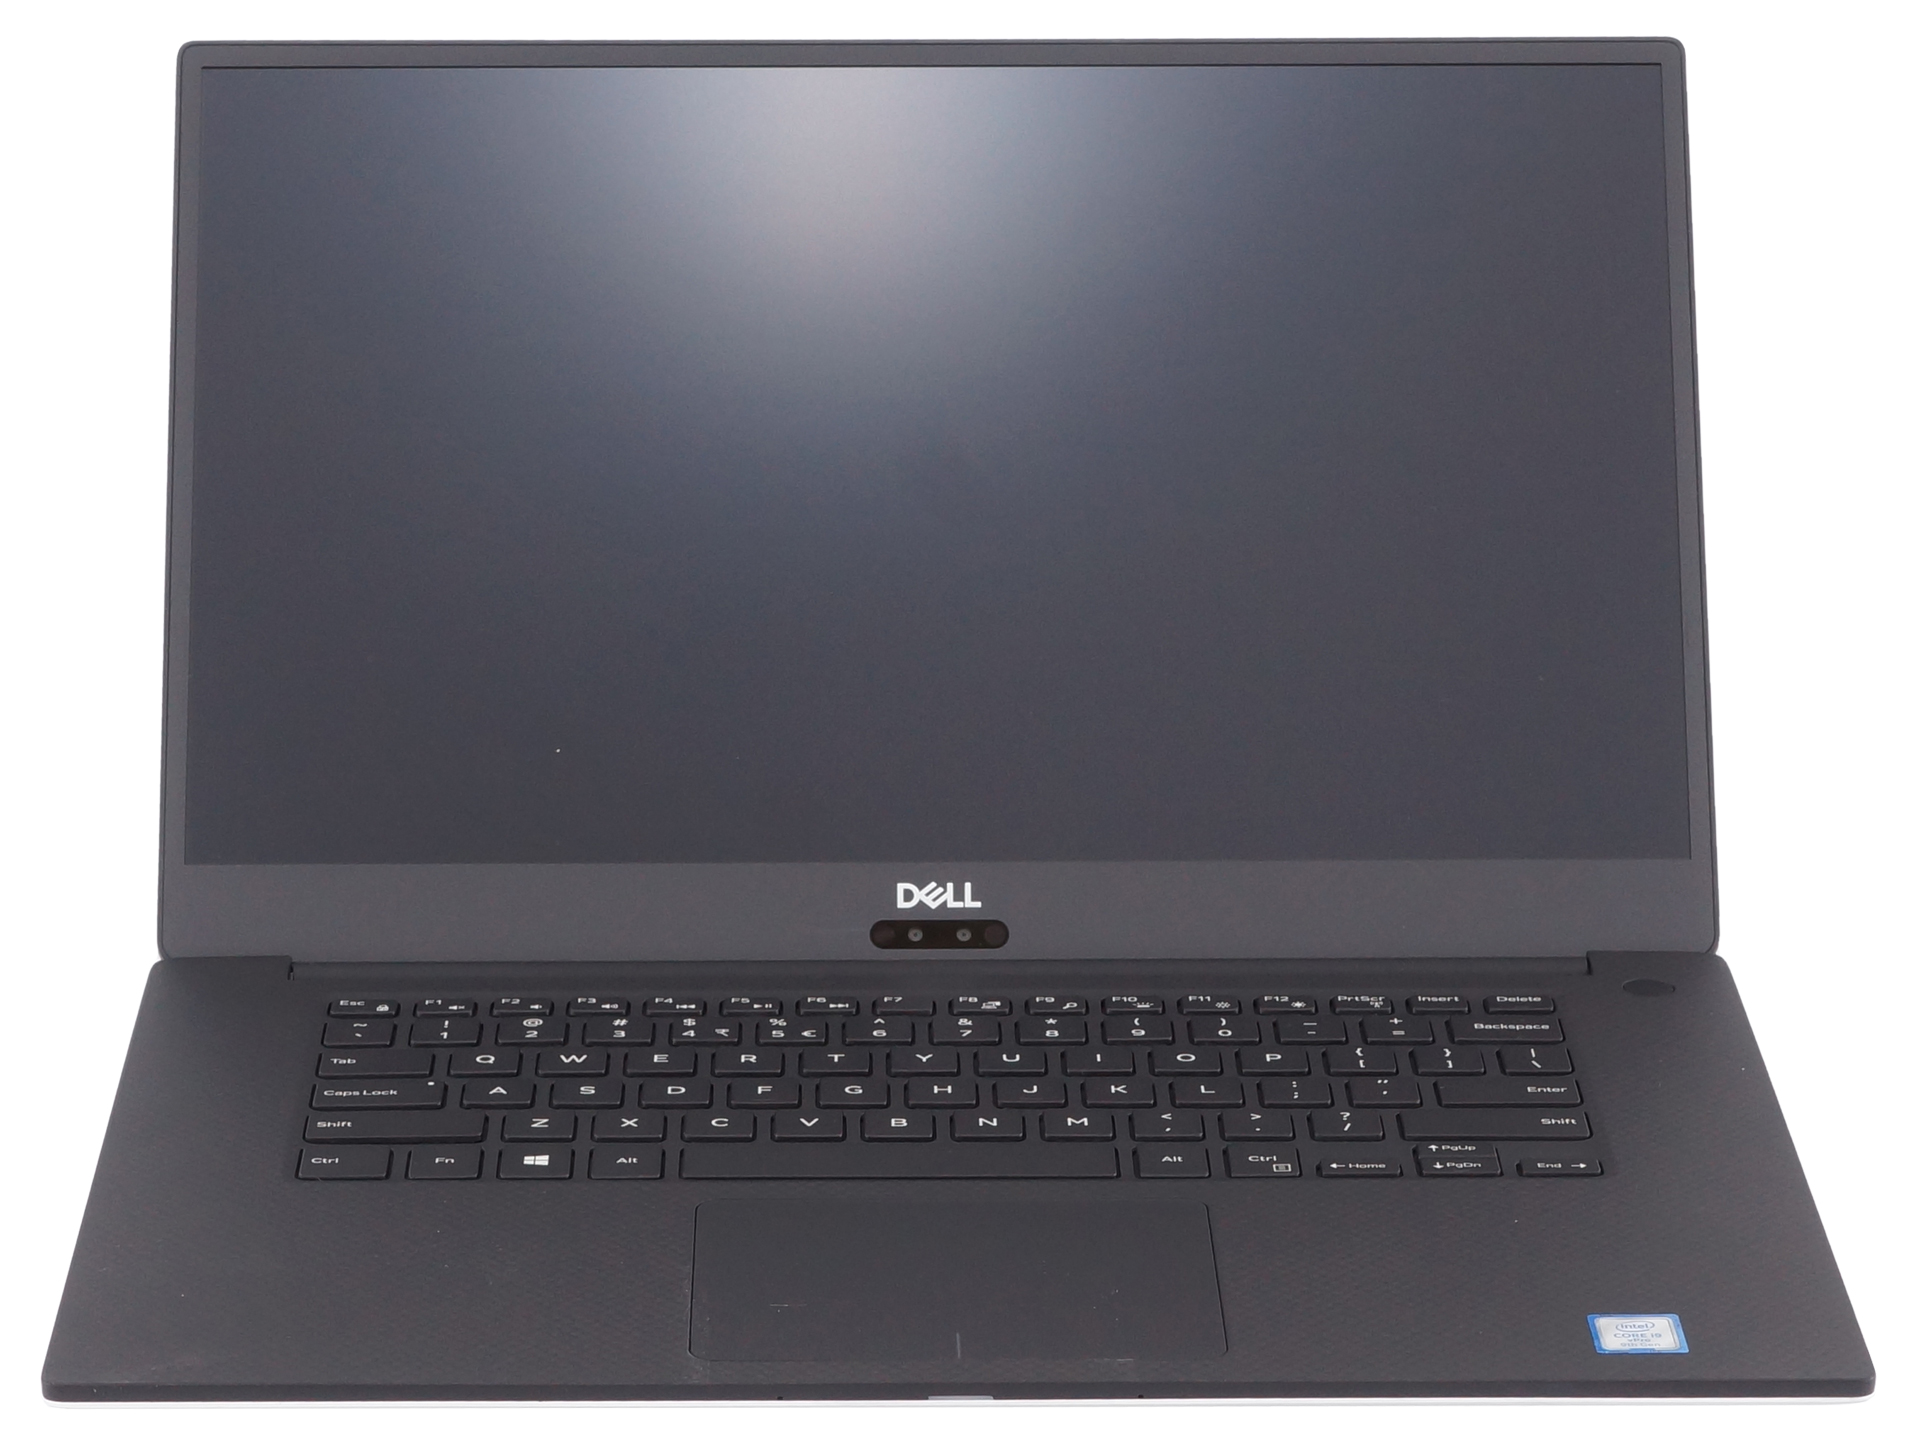 Dell Precision 15 5540 review - a thin and light tool for